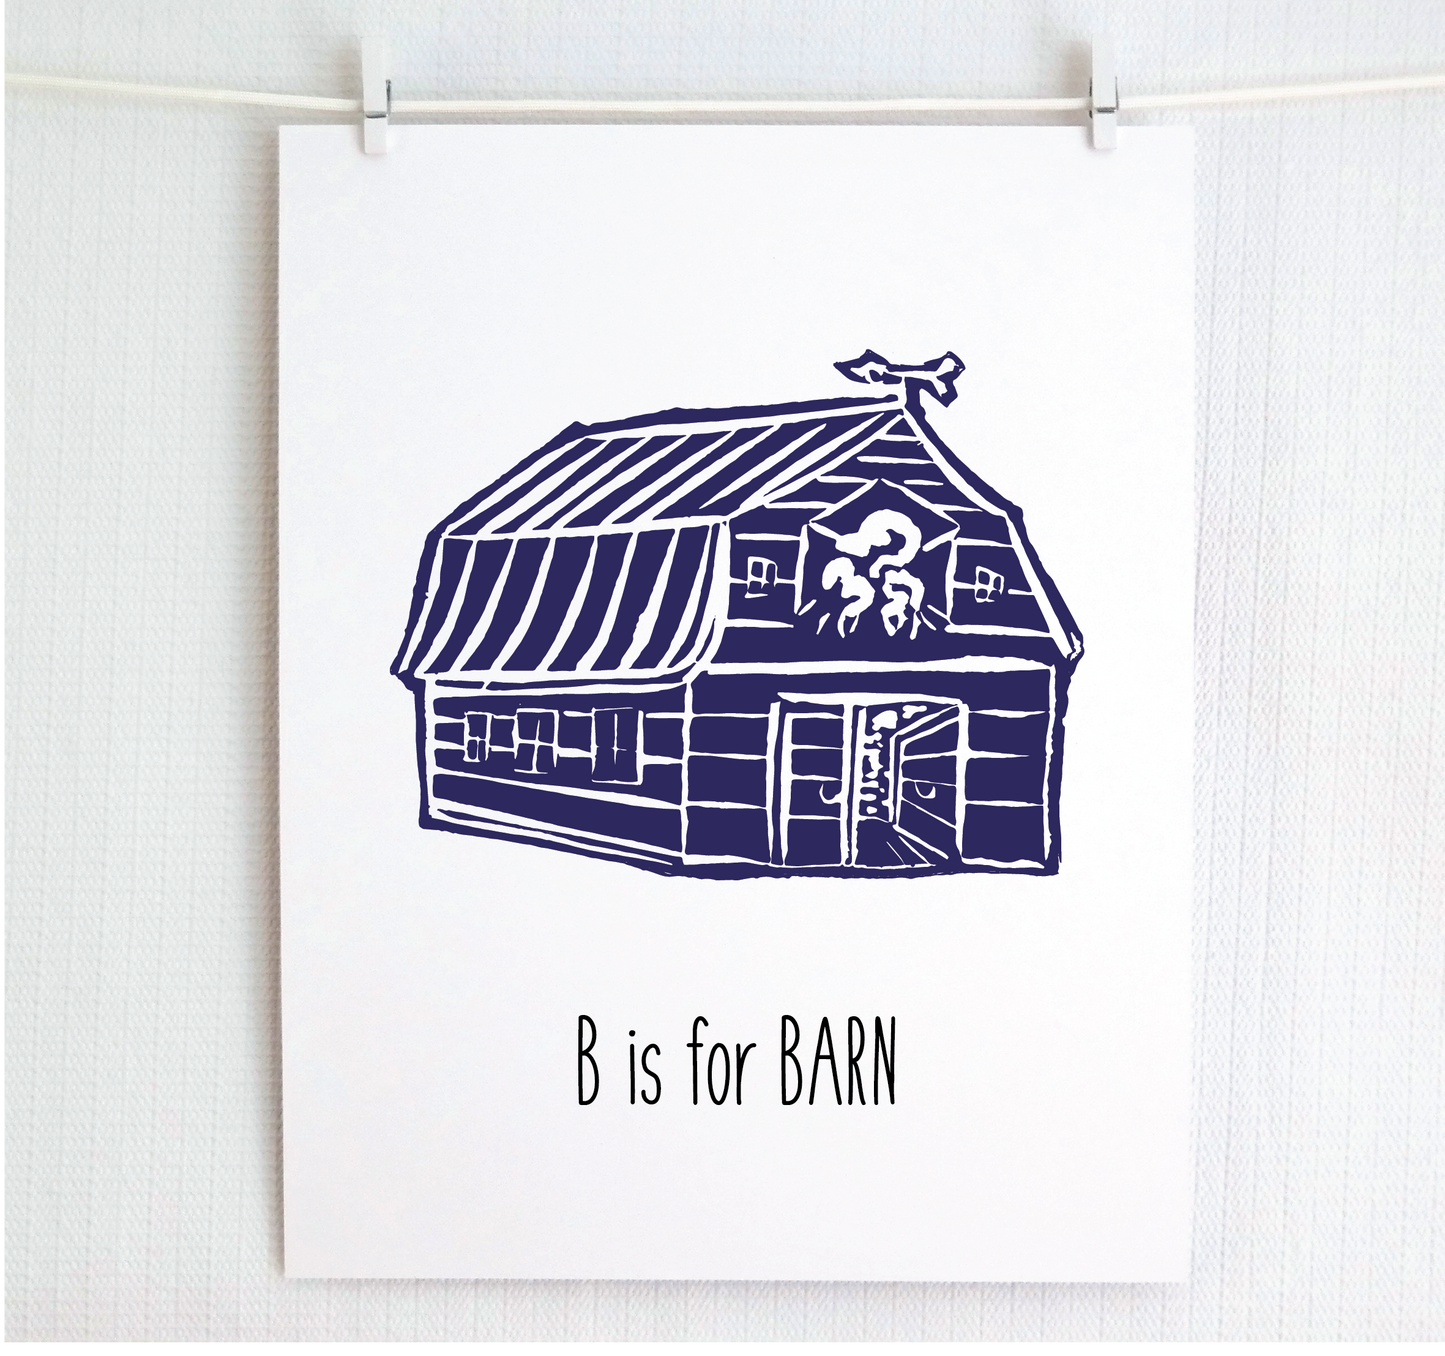 B is for Barn